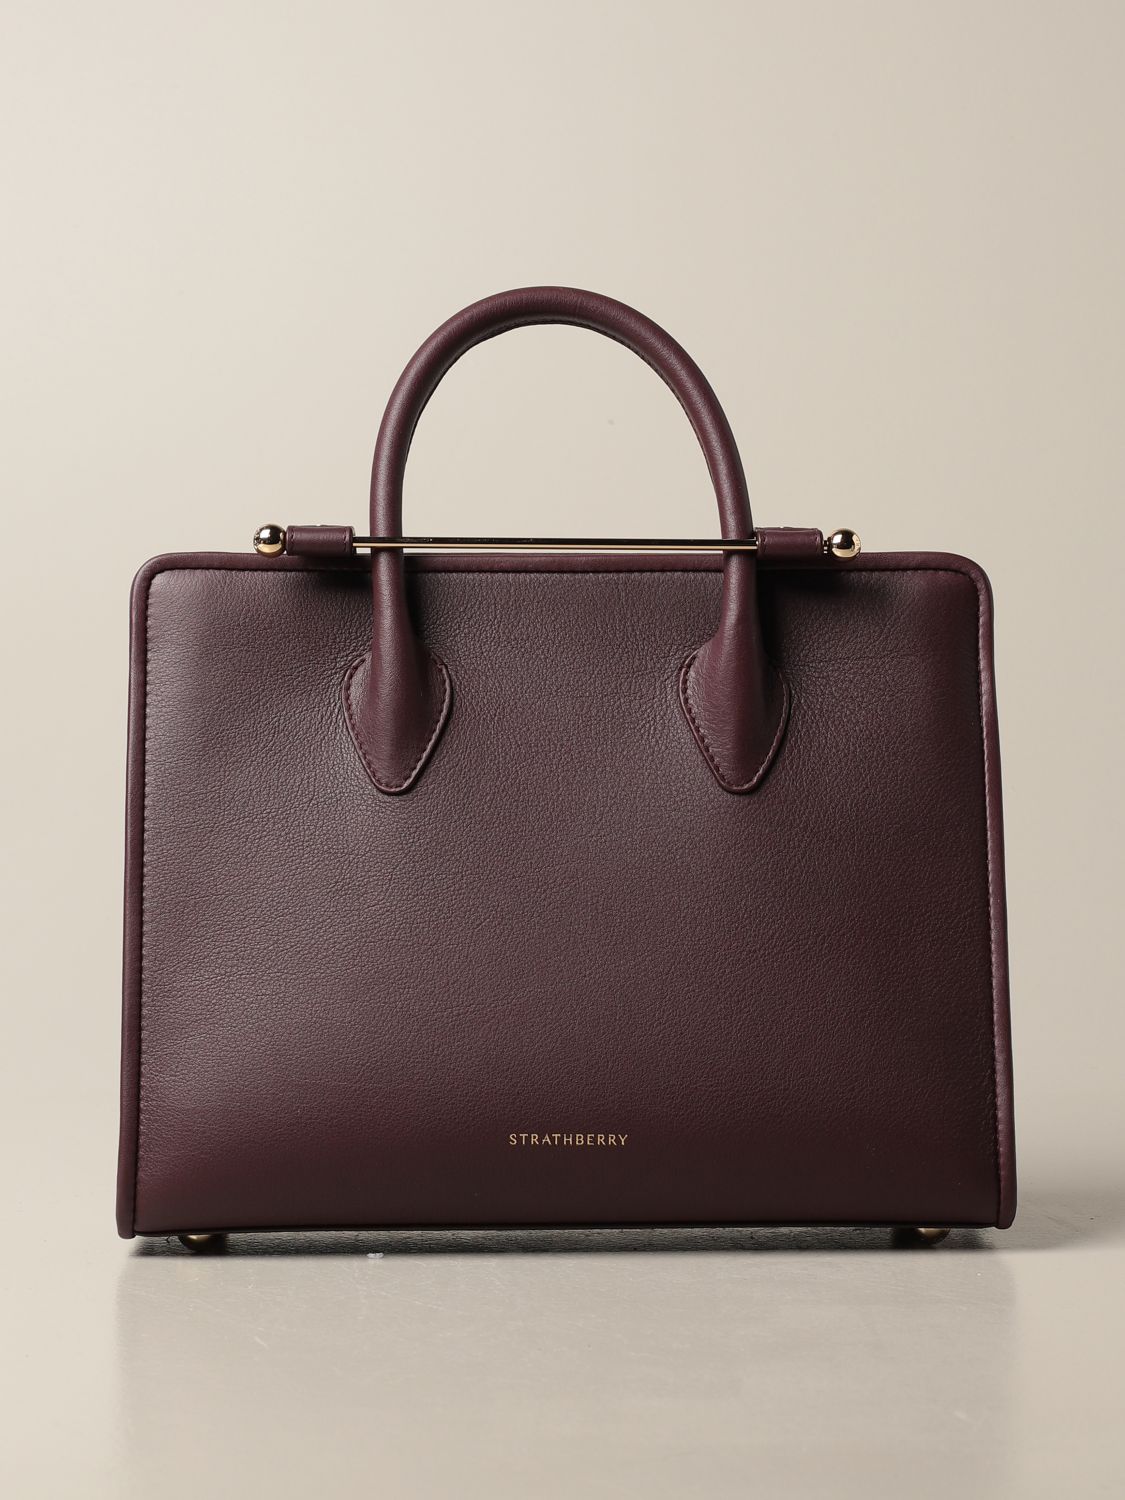 STRATHBERRY: Midi Tote bag in leather - Burgundy | Strathberry tote ...